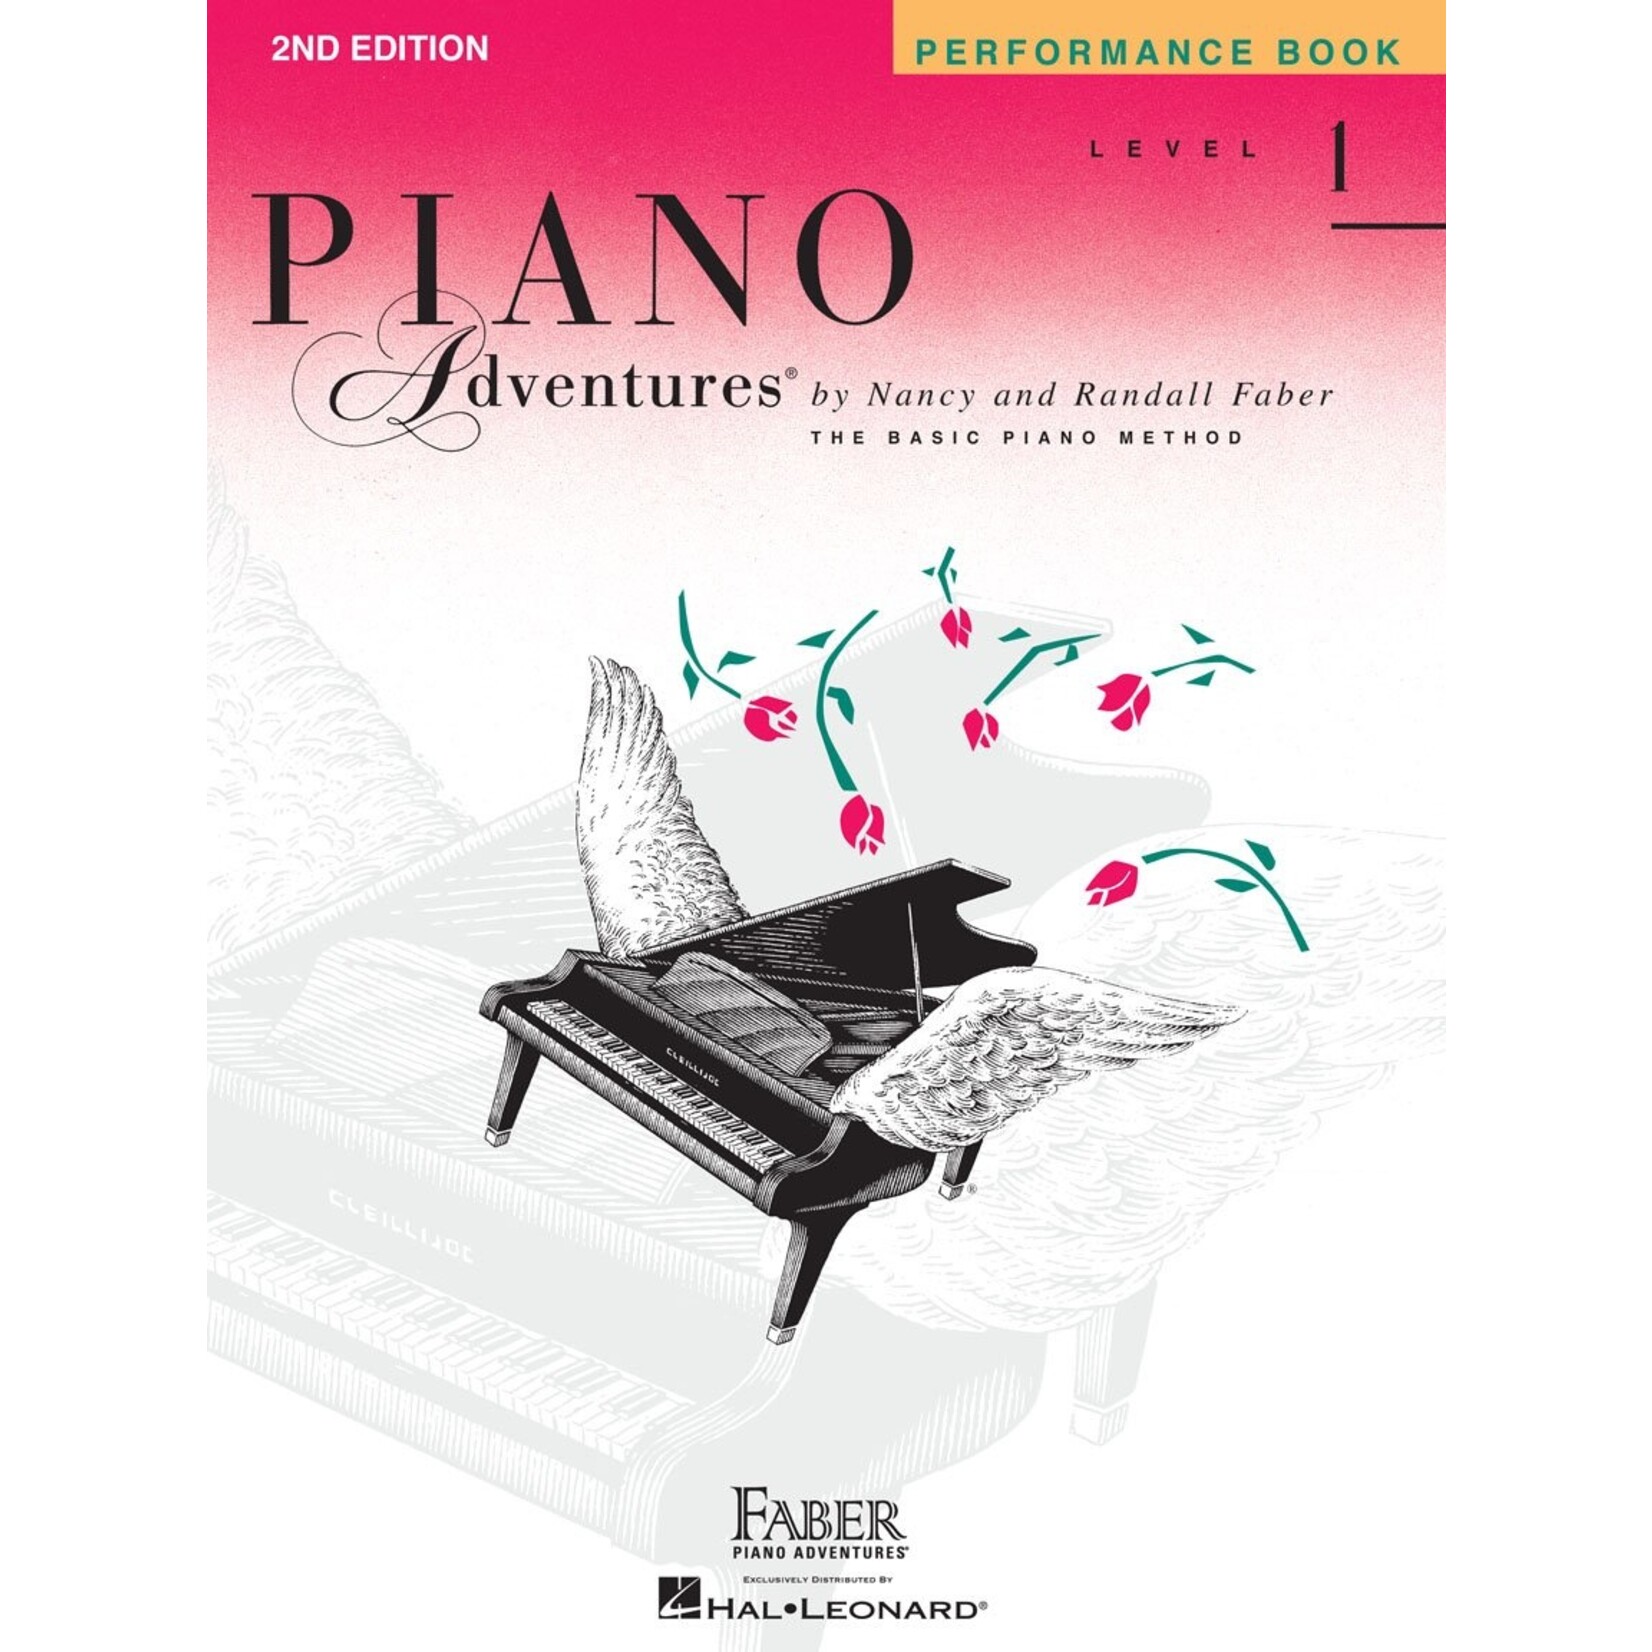 Faber Piano Adventures Level 1 - Performance Book - 2nd Edition